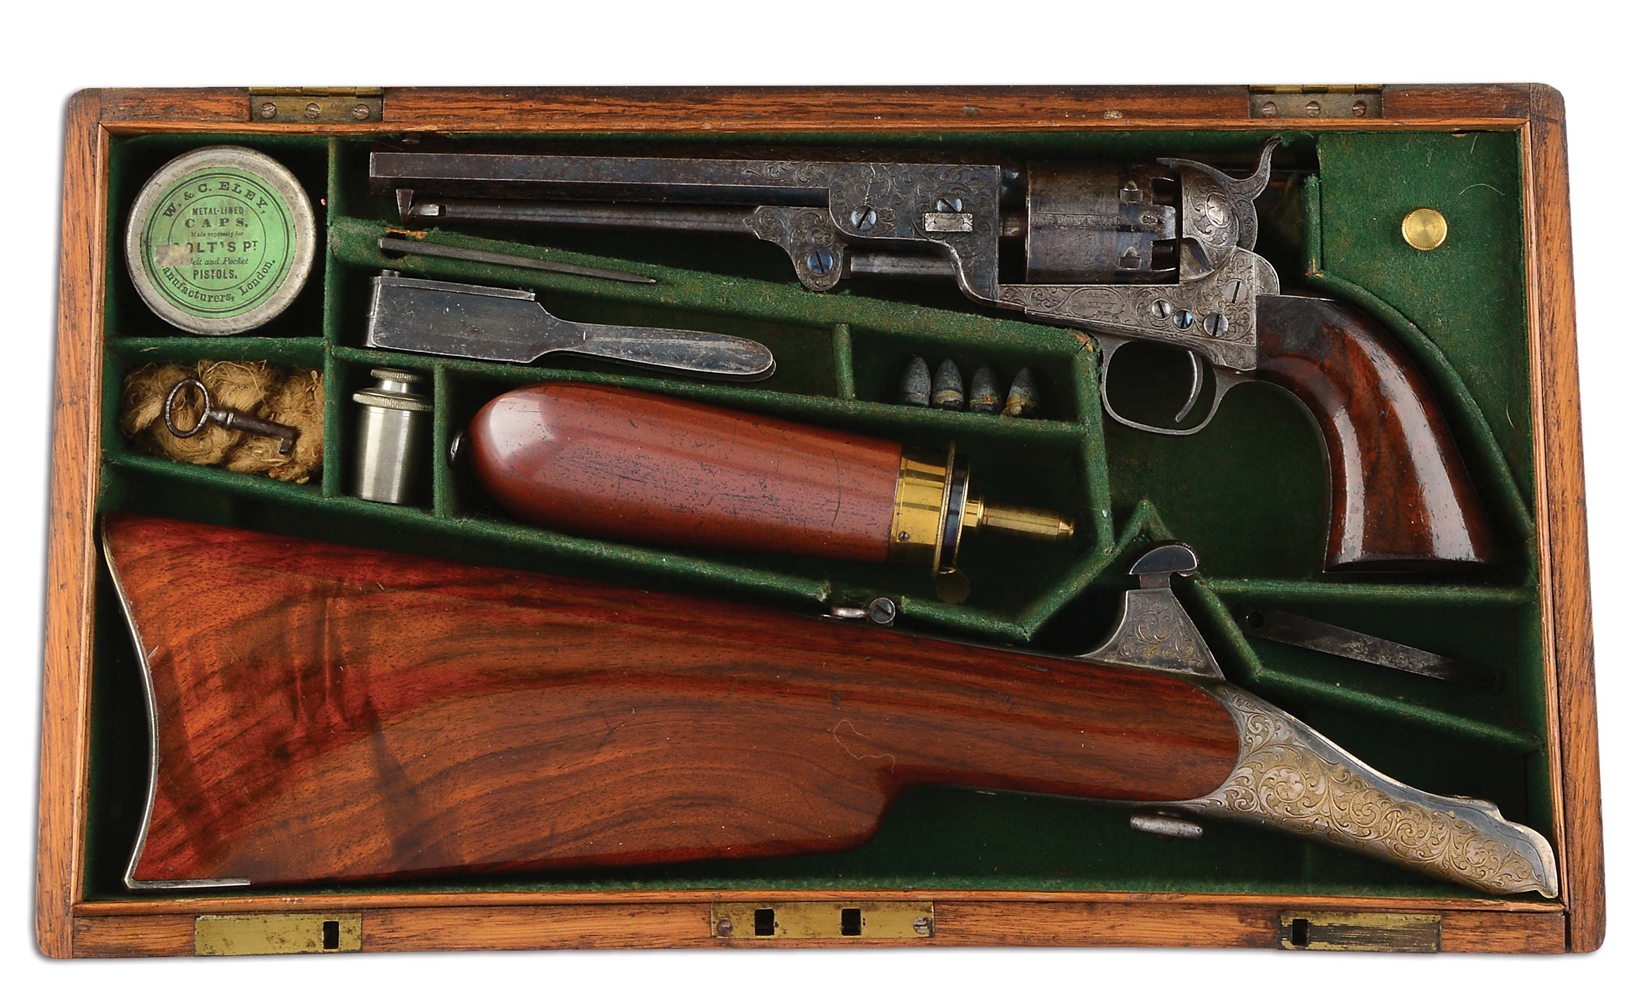 (A) RARE CASED FACTORY ENGRAVED COLT MODEL 1851 NAVY REVOLVER WITH ENGRAVED MATCHING SHOULDER STOCK (CARBINE BREECH) (1859).